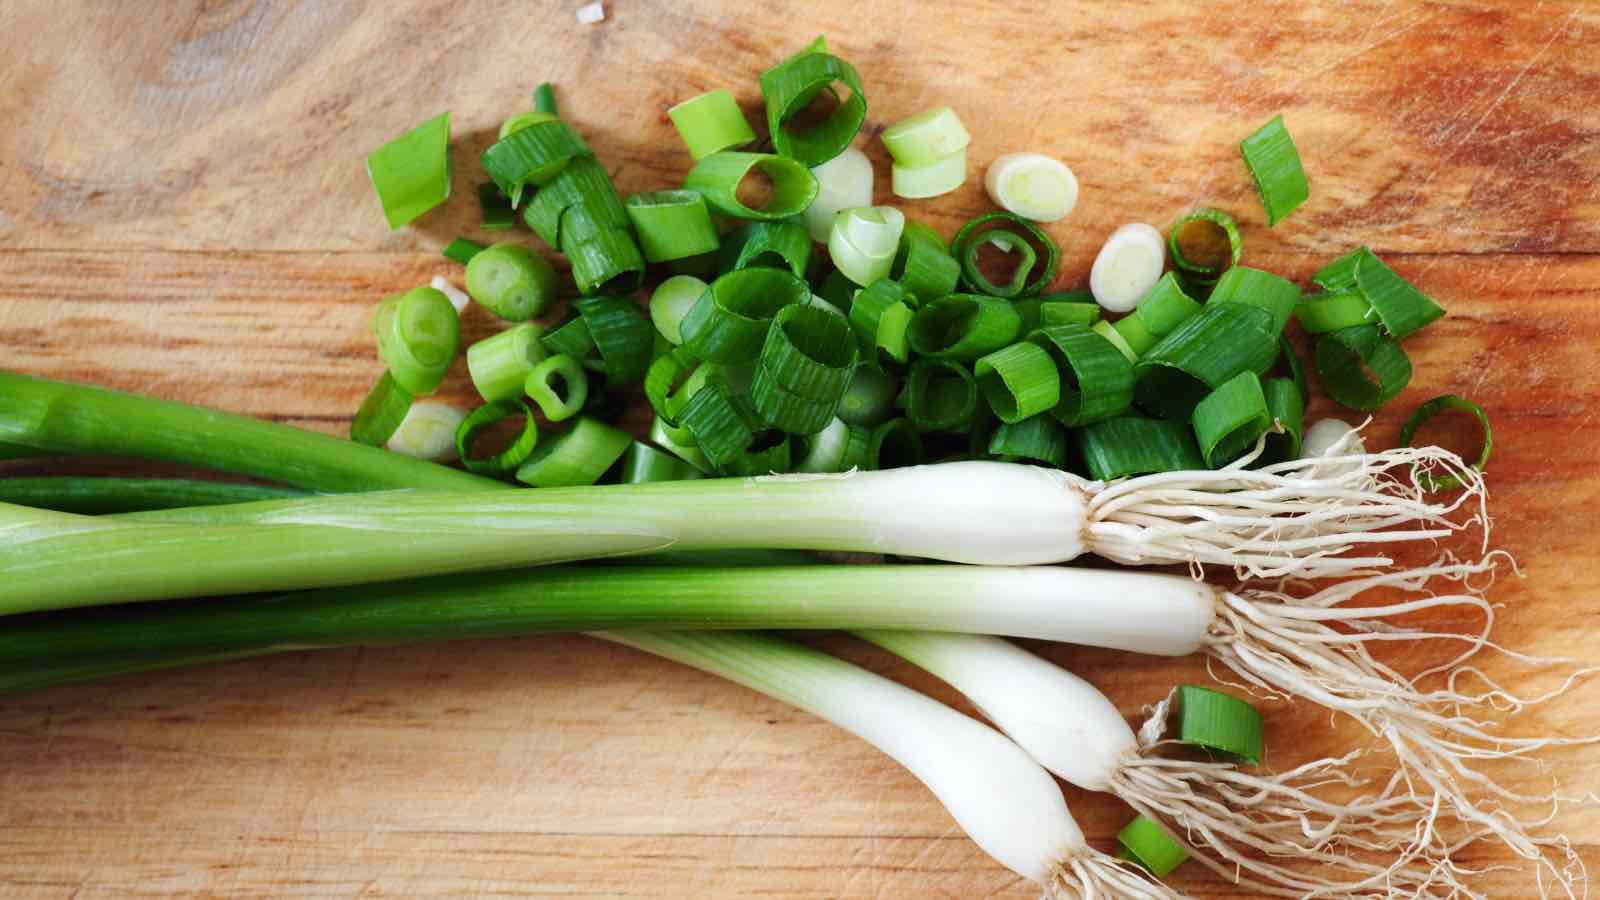 How To Cut Green Onions (Step-By-Step Guide)